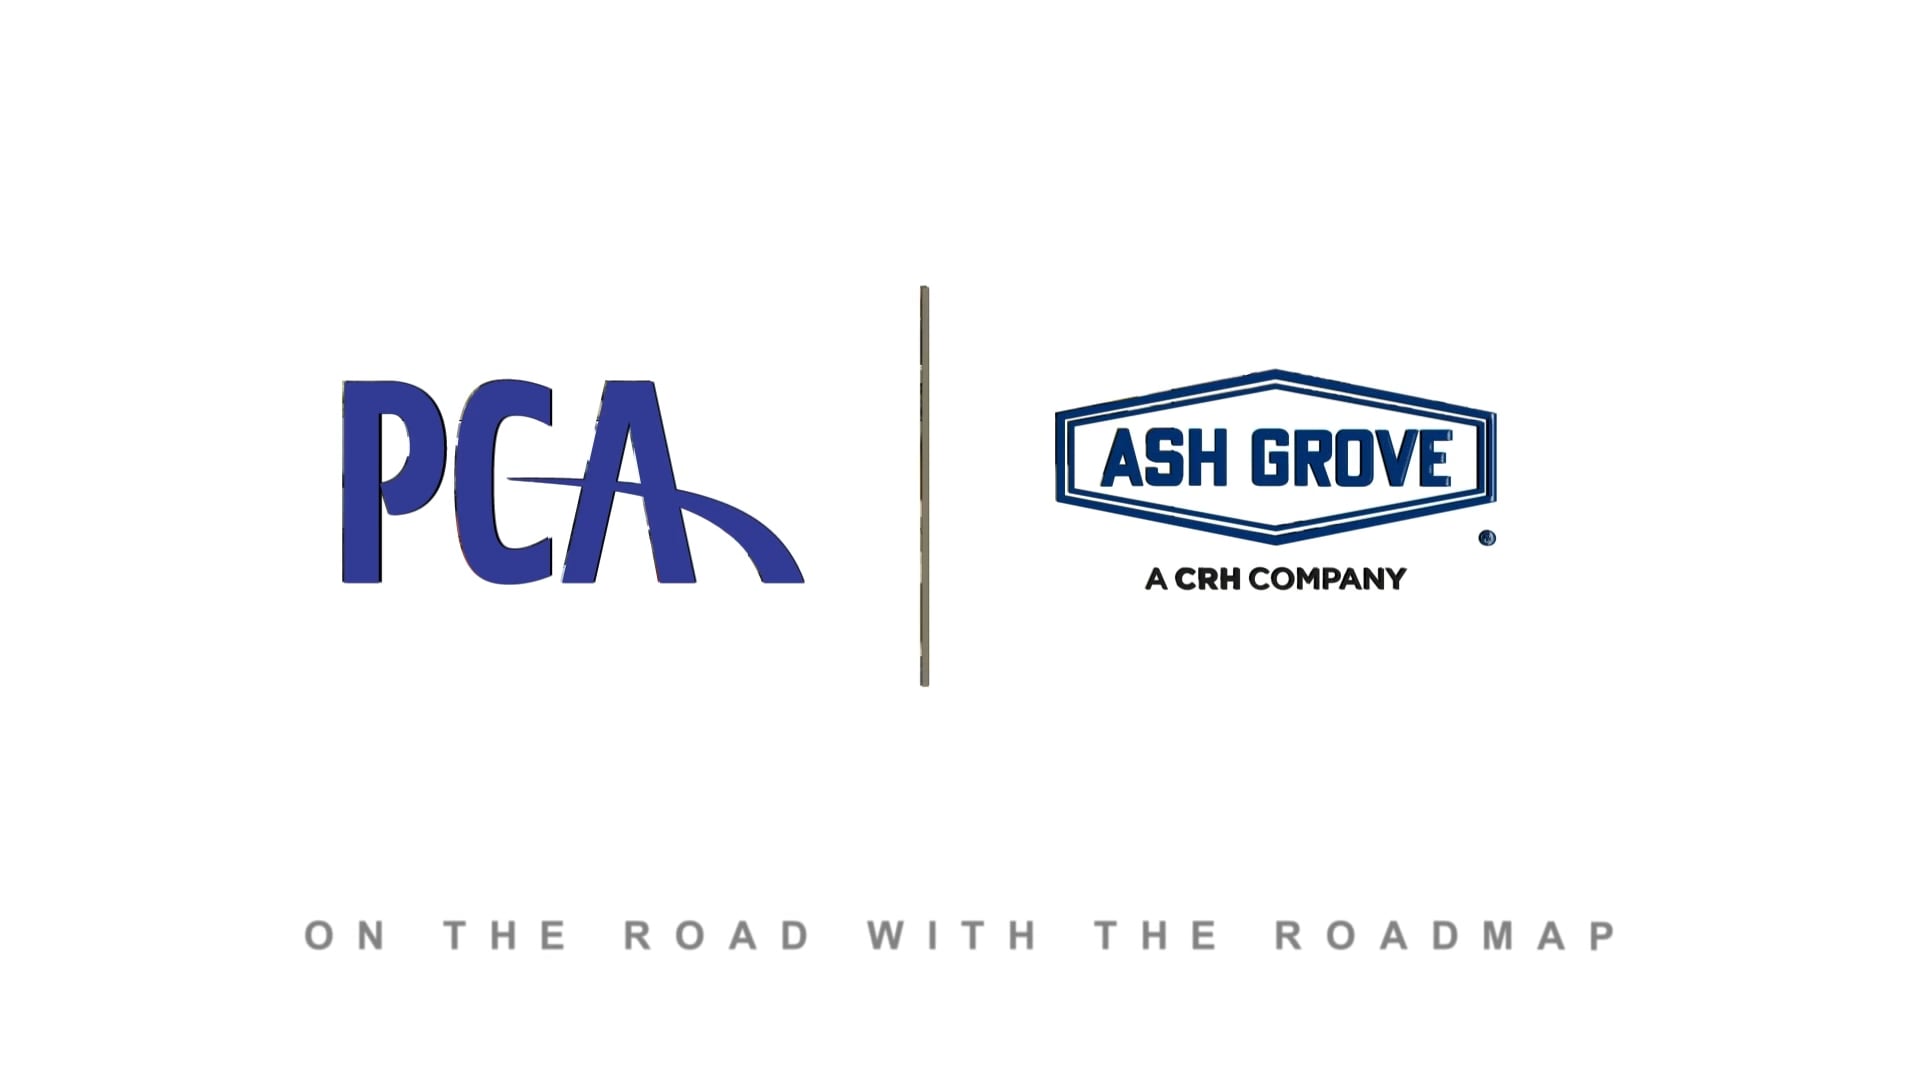 Serge Schmidt of Ash Grove – On the Road with the Roadmap